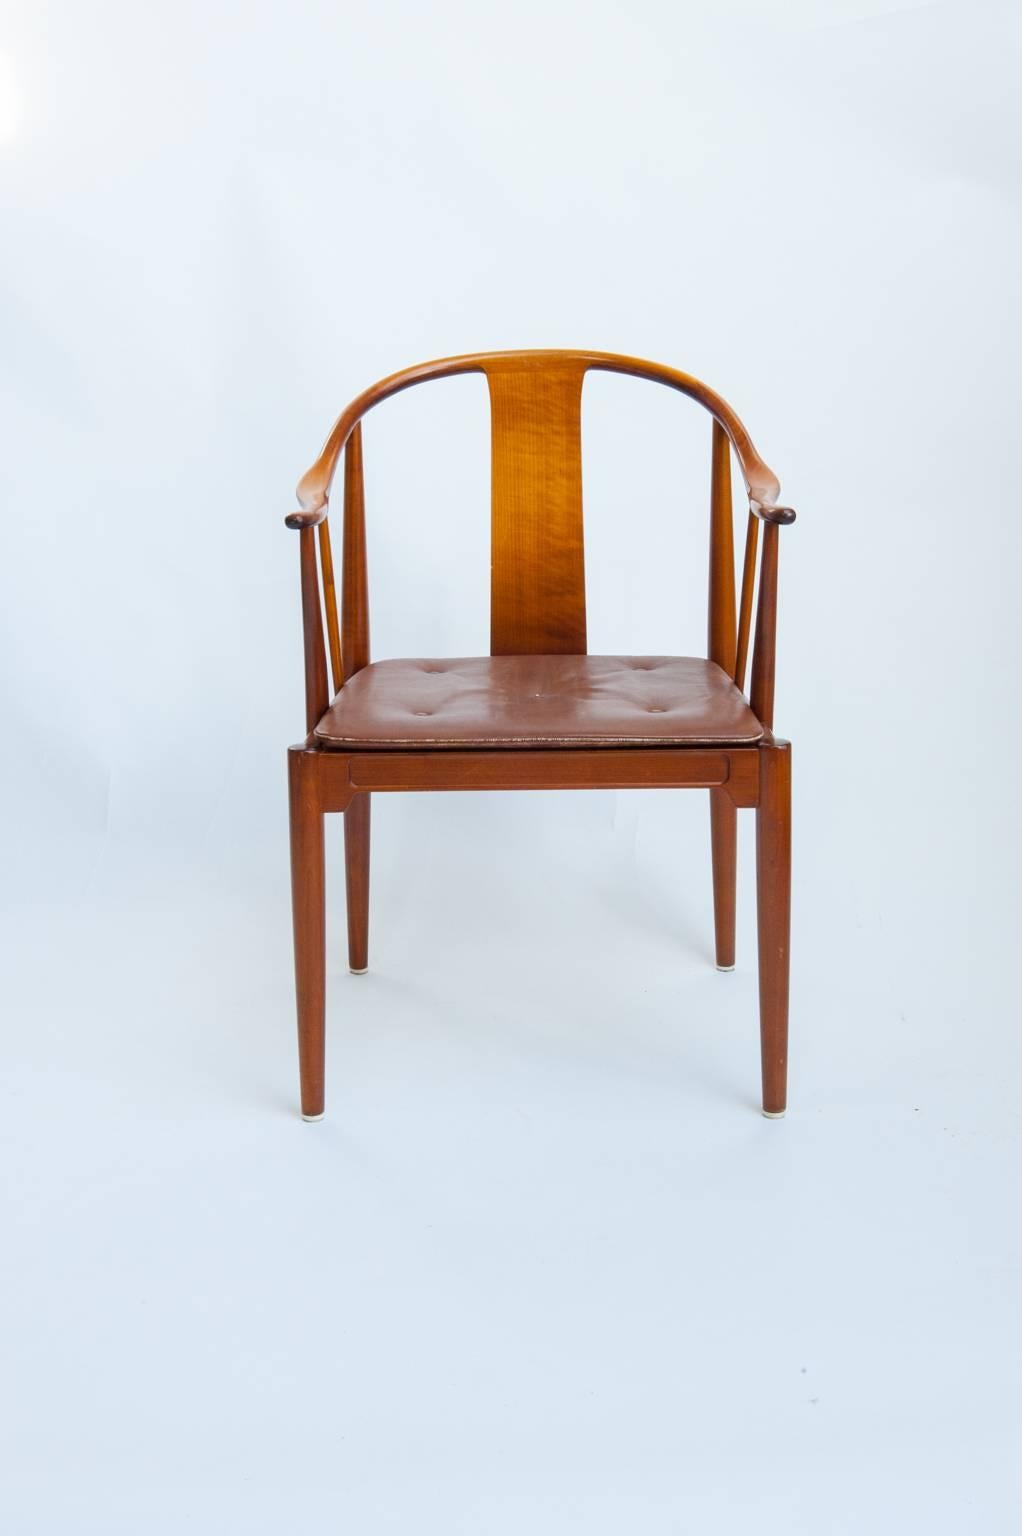 Hans J. Wegners famous and beautiful chair is an adaptation of an old Chinese chair of the Ming dynasty; 